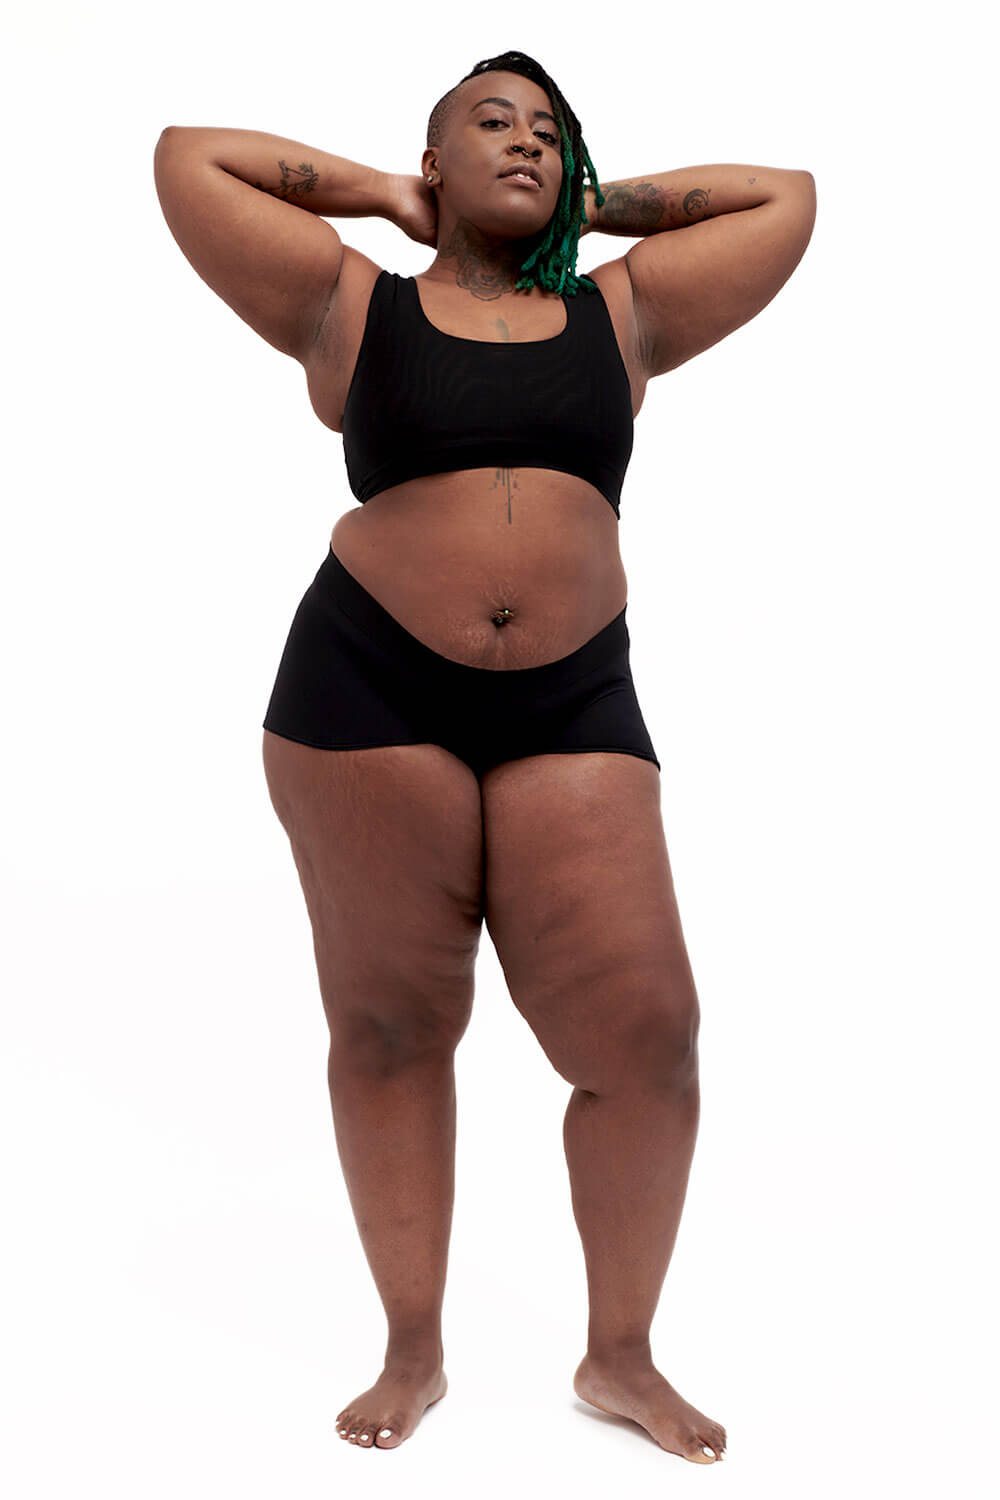 Plus-sized person wearing a black sports bra style chest binder made from breathable mesh, photographed from the front with arms up.